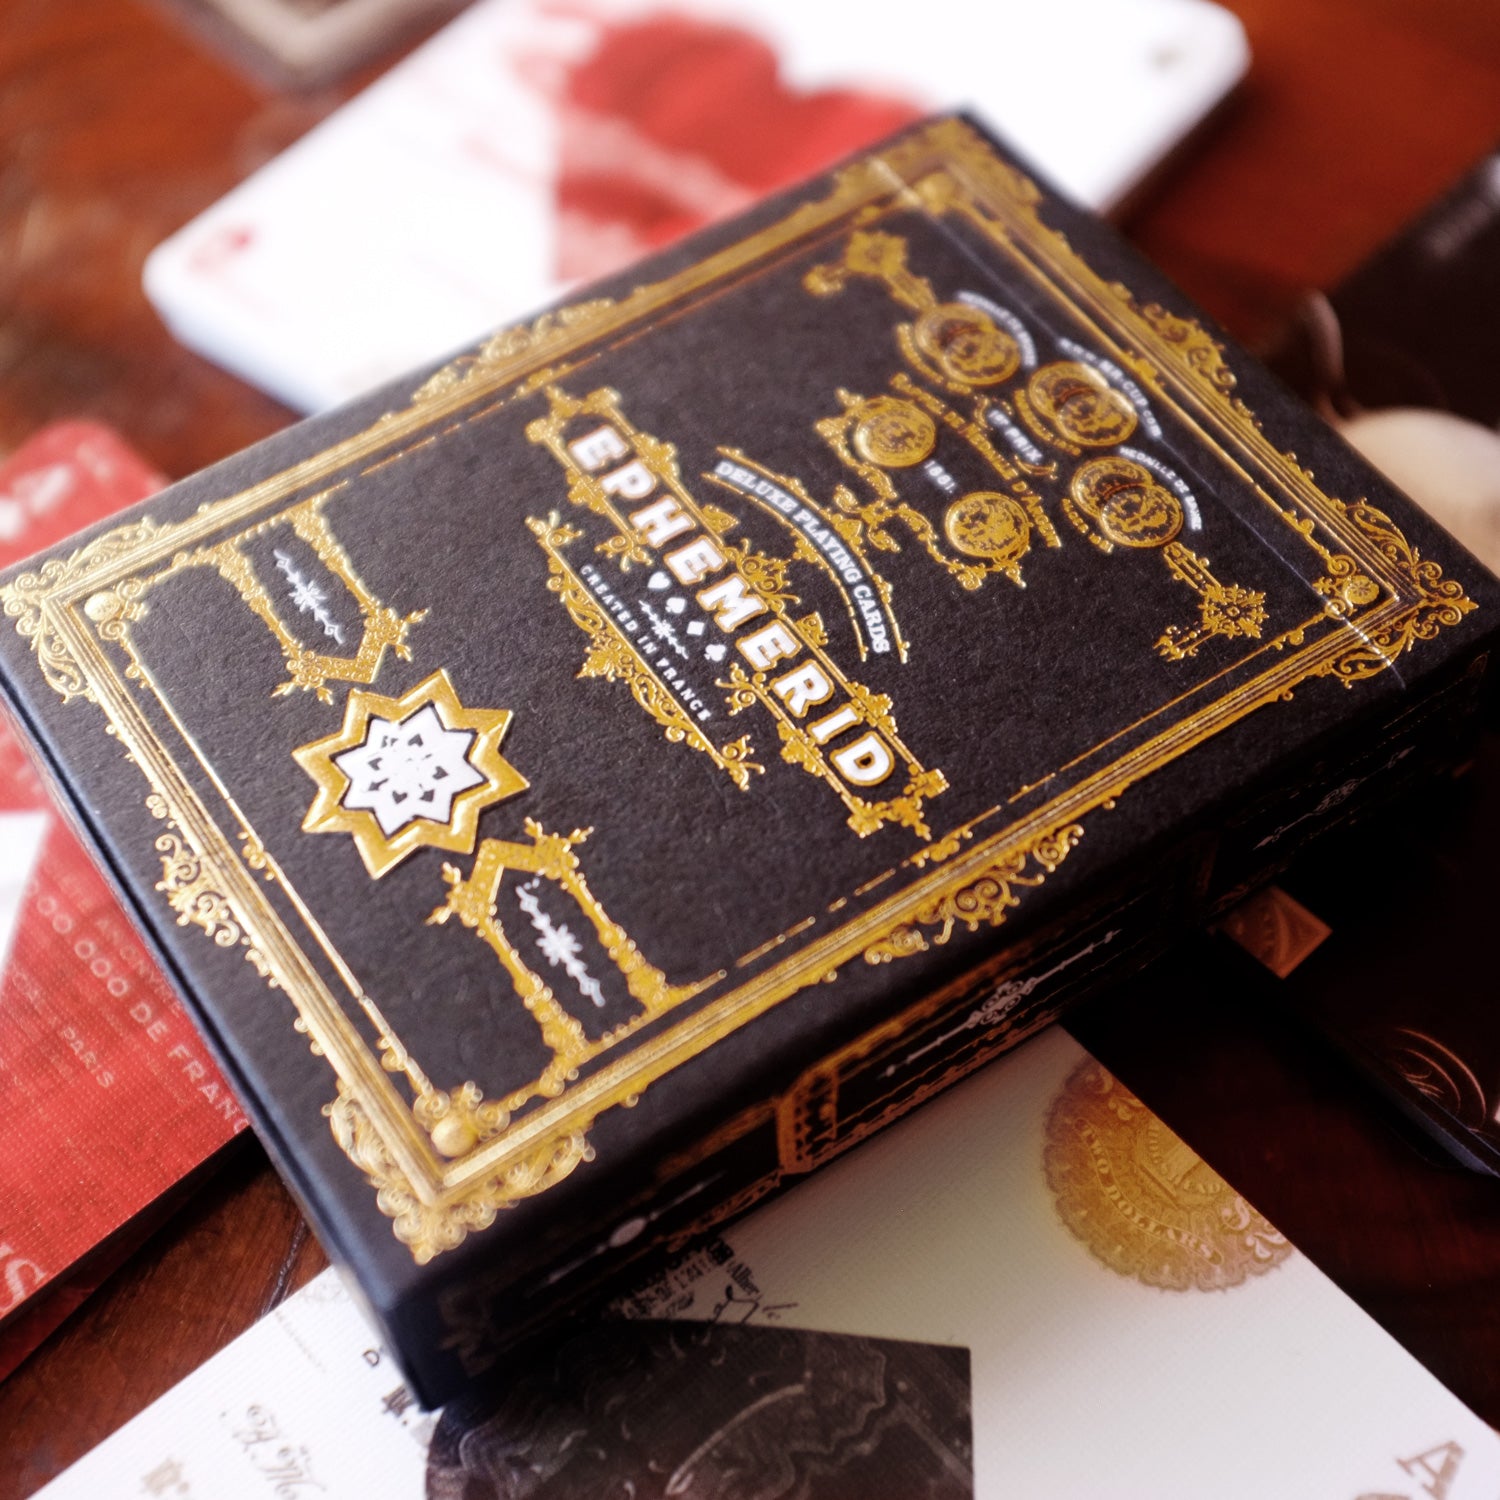 EPHEMERID Playing cards - DELUXE editions v2